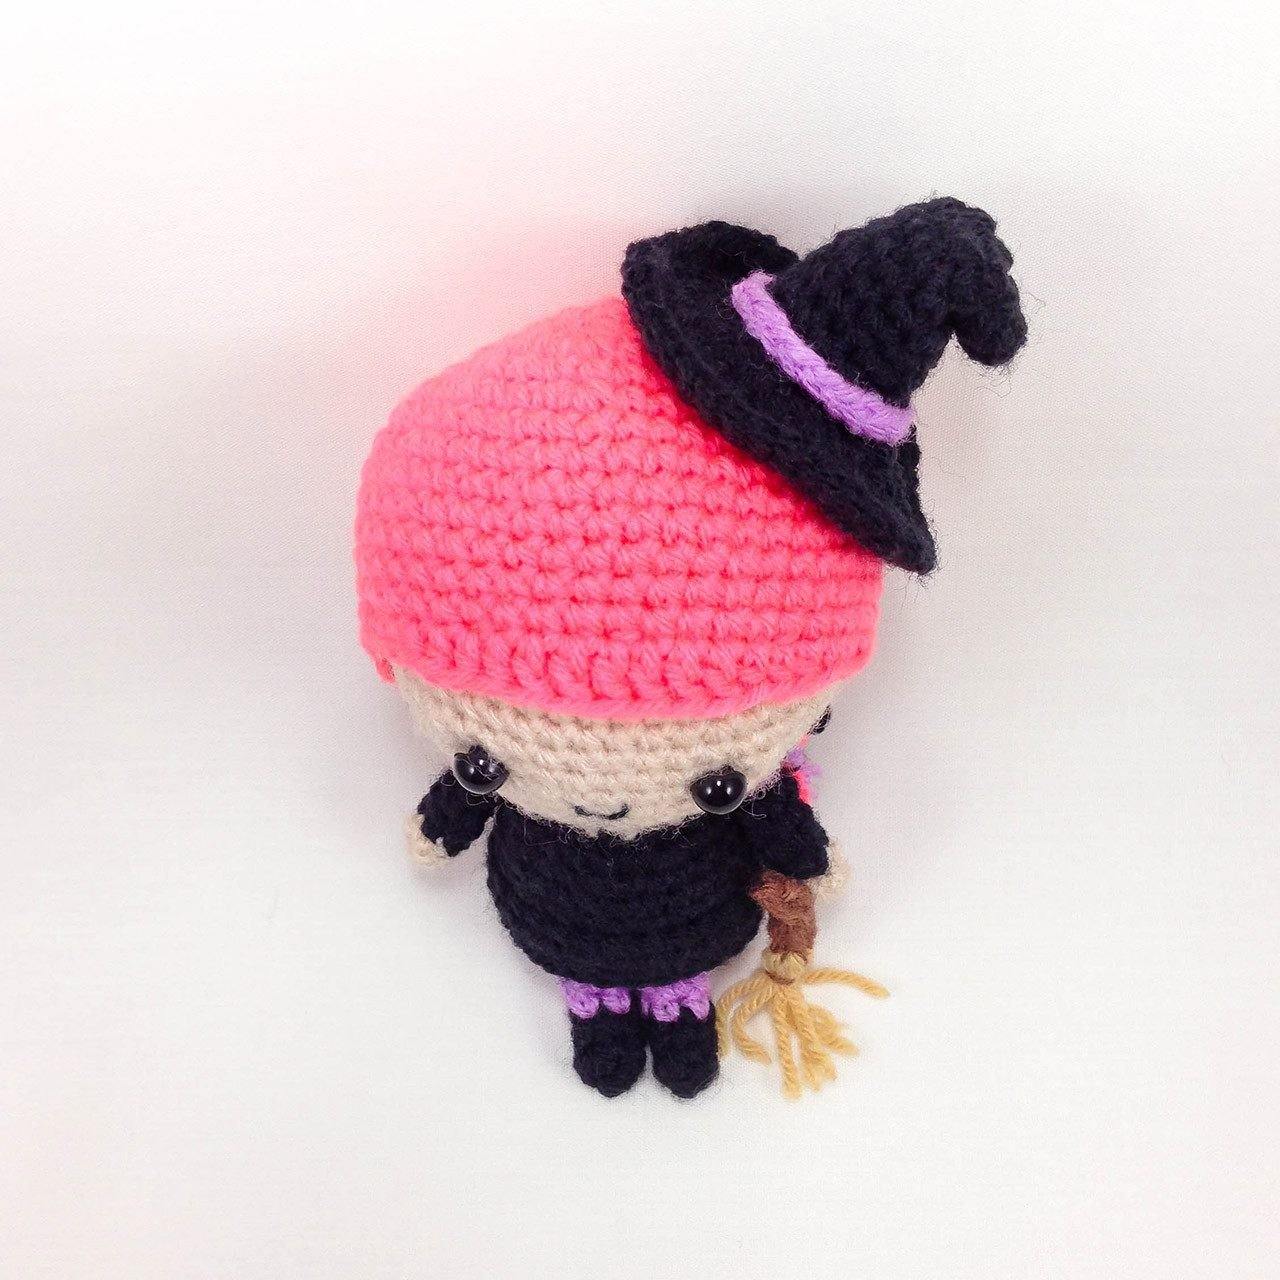 Amigurumi Witch doll top view